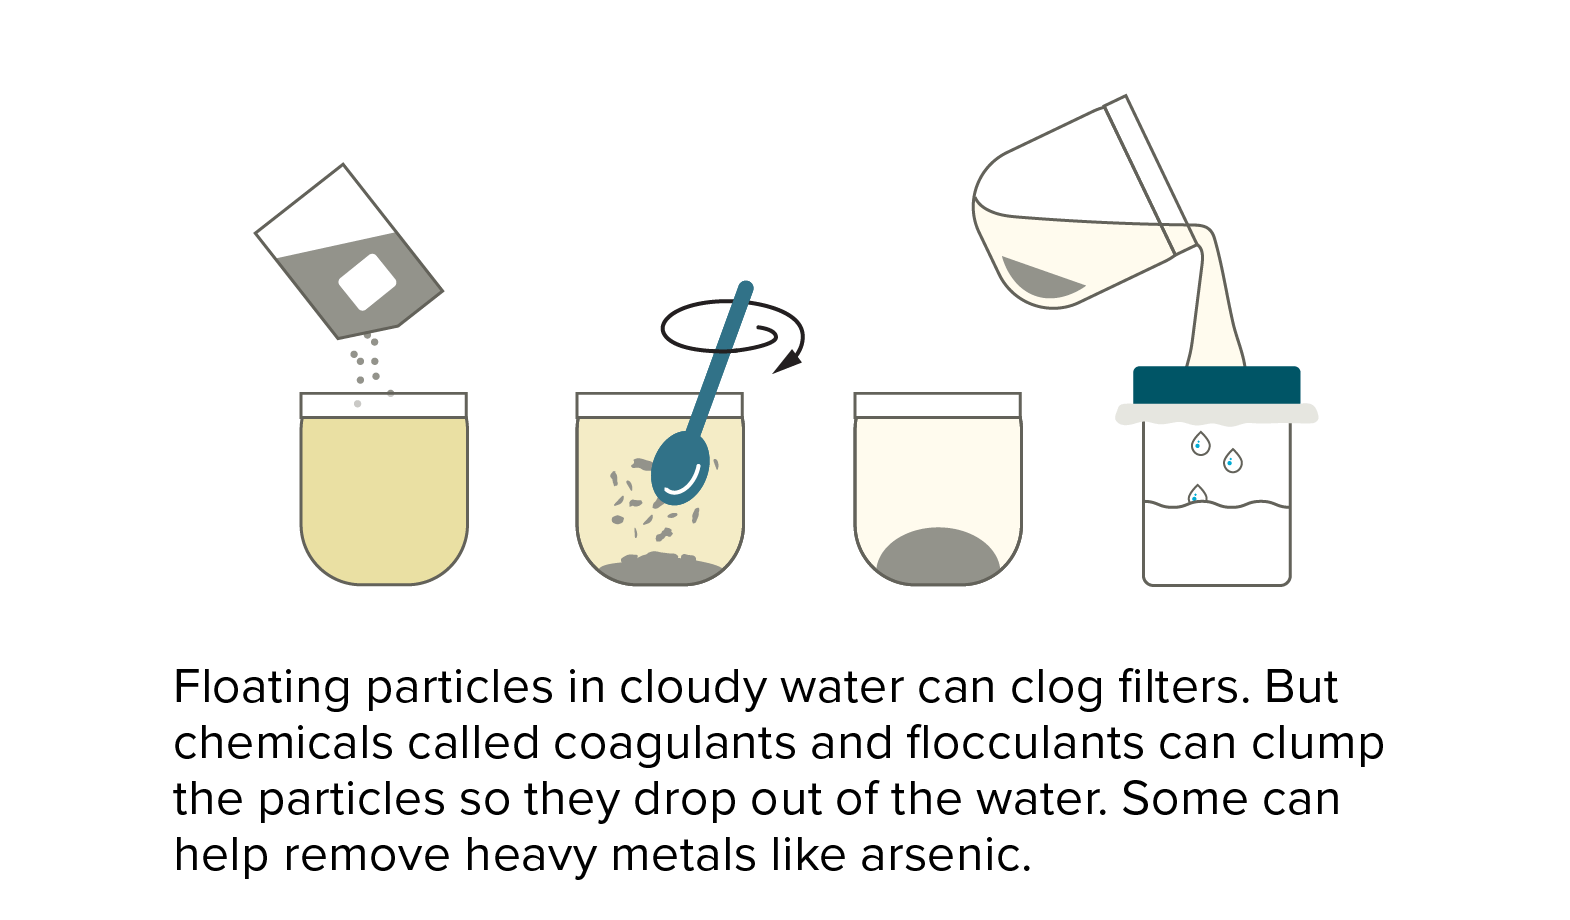 Floating particles in cloudy water can clog filters. But, as shown in this illustration, chemicals called coagulants and flocculants can clump the particles so they drop out of the water. Some can help remove heavy metals like arsenic.